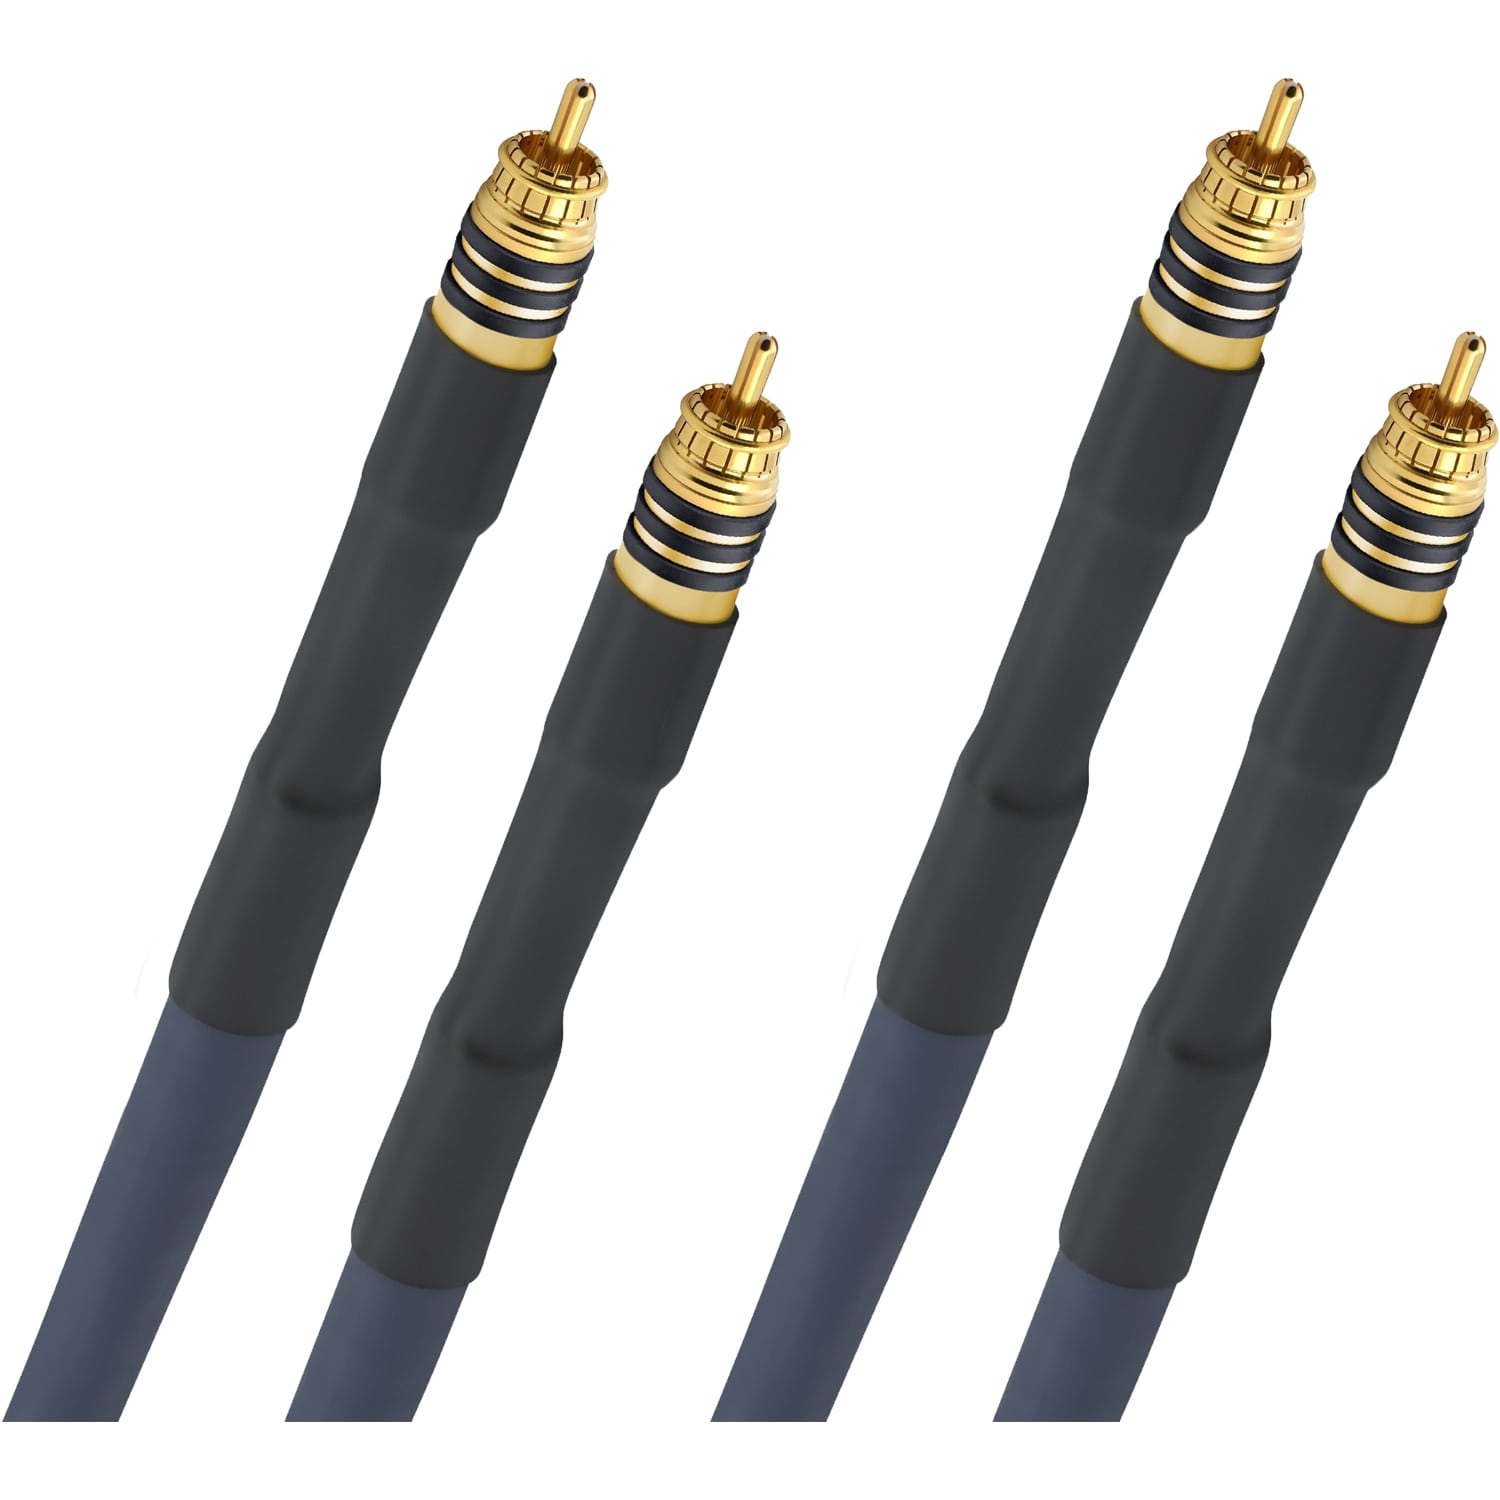 Кабели межблочные аудио Oehlbach STATE OF THE ART XXL Cable RCA, 2x1,50m, gold, D1C13114 кабели межблочные аудио oehlbach state of the art xxl cable rca 2x1 25m gold d1c13113